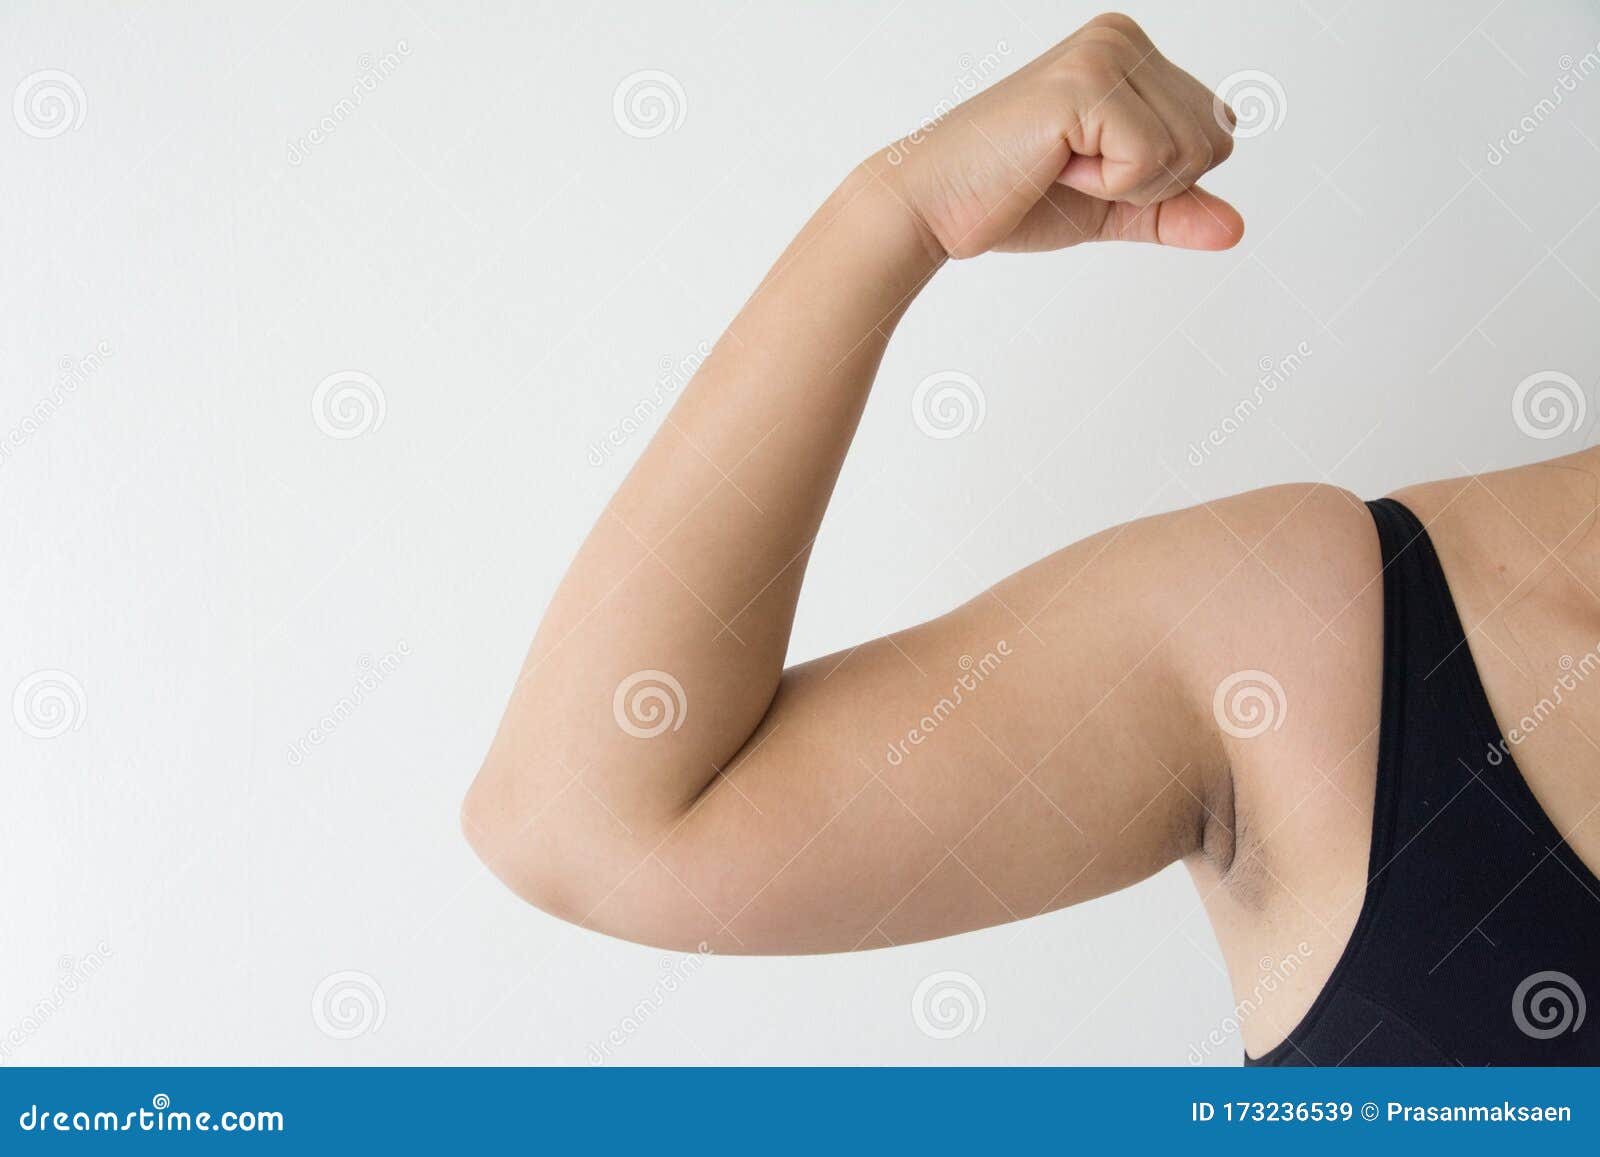 What Does Fat Arms Mean